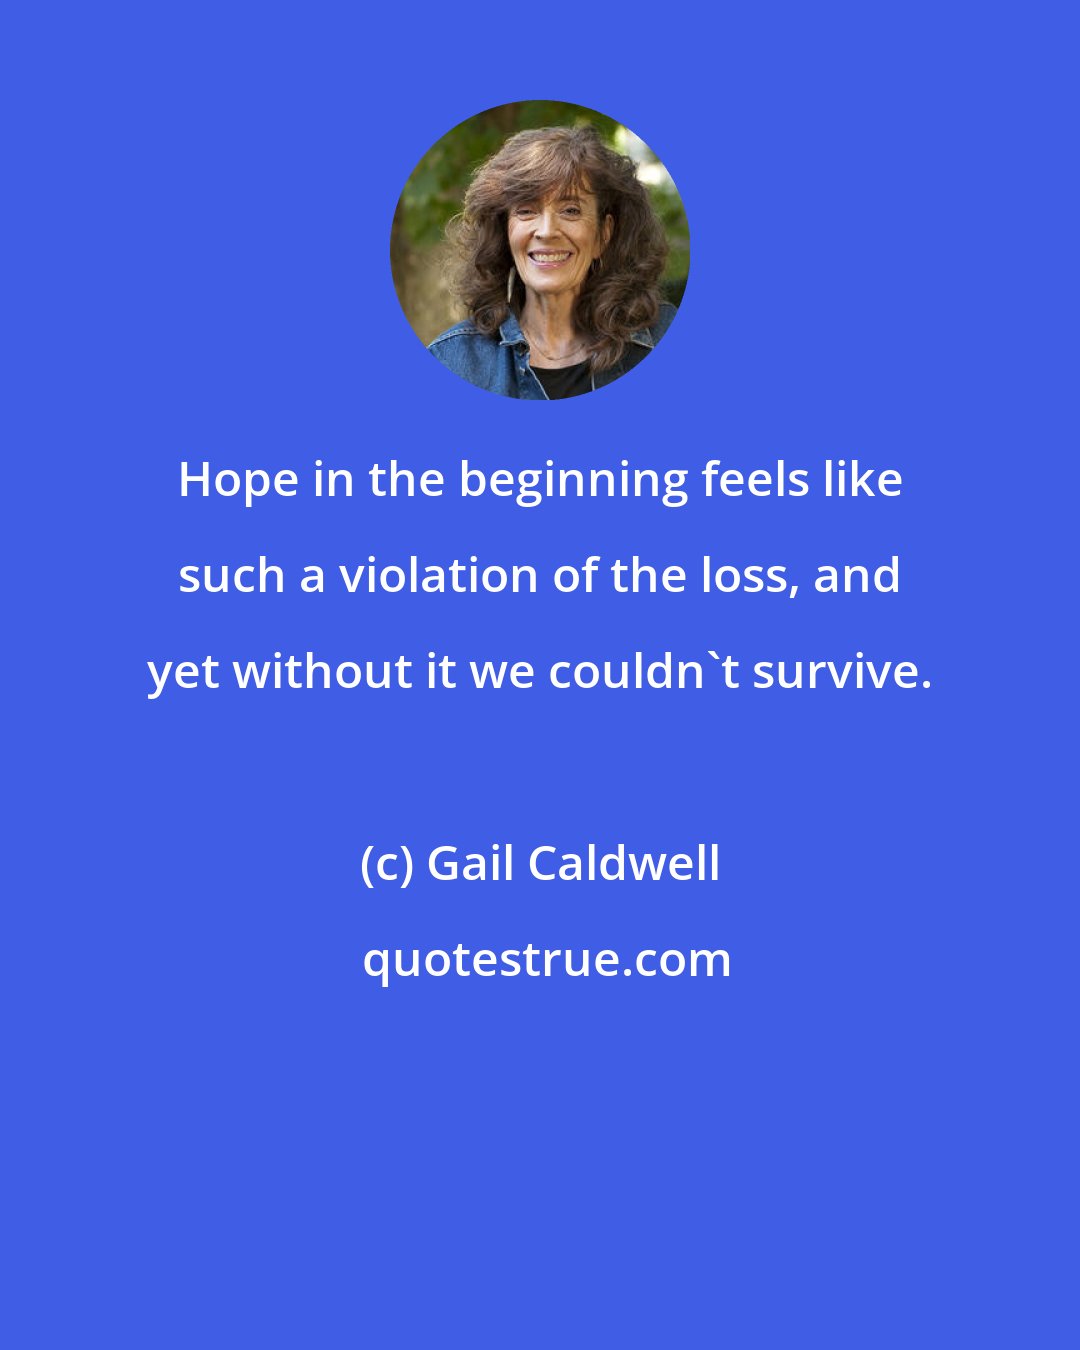 Gail Caldwell: Hope in the beginning feels like such a violation of the loss, and yet without it we couldn't survive.